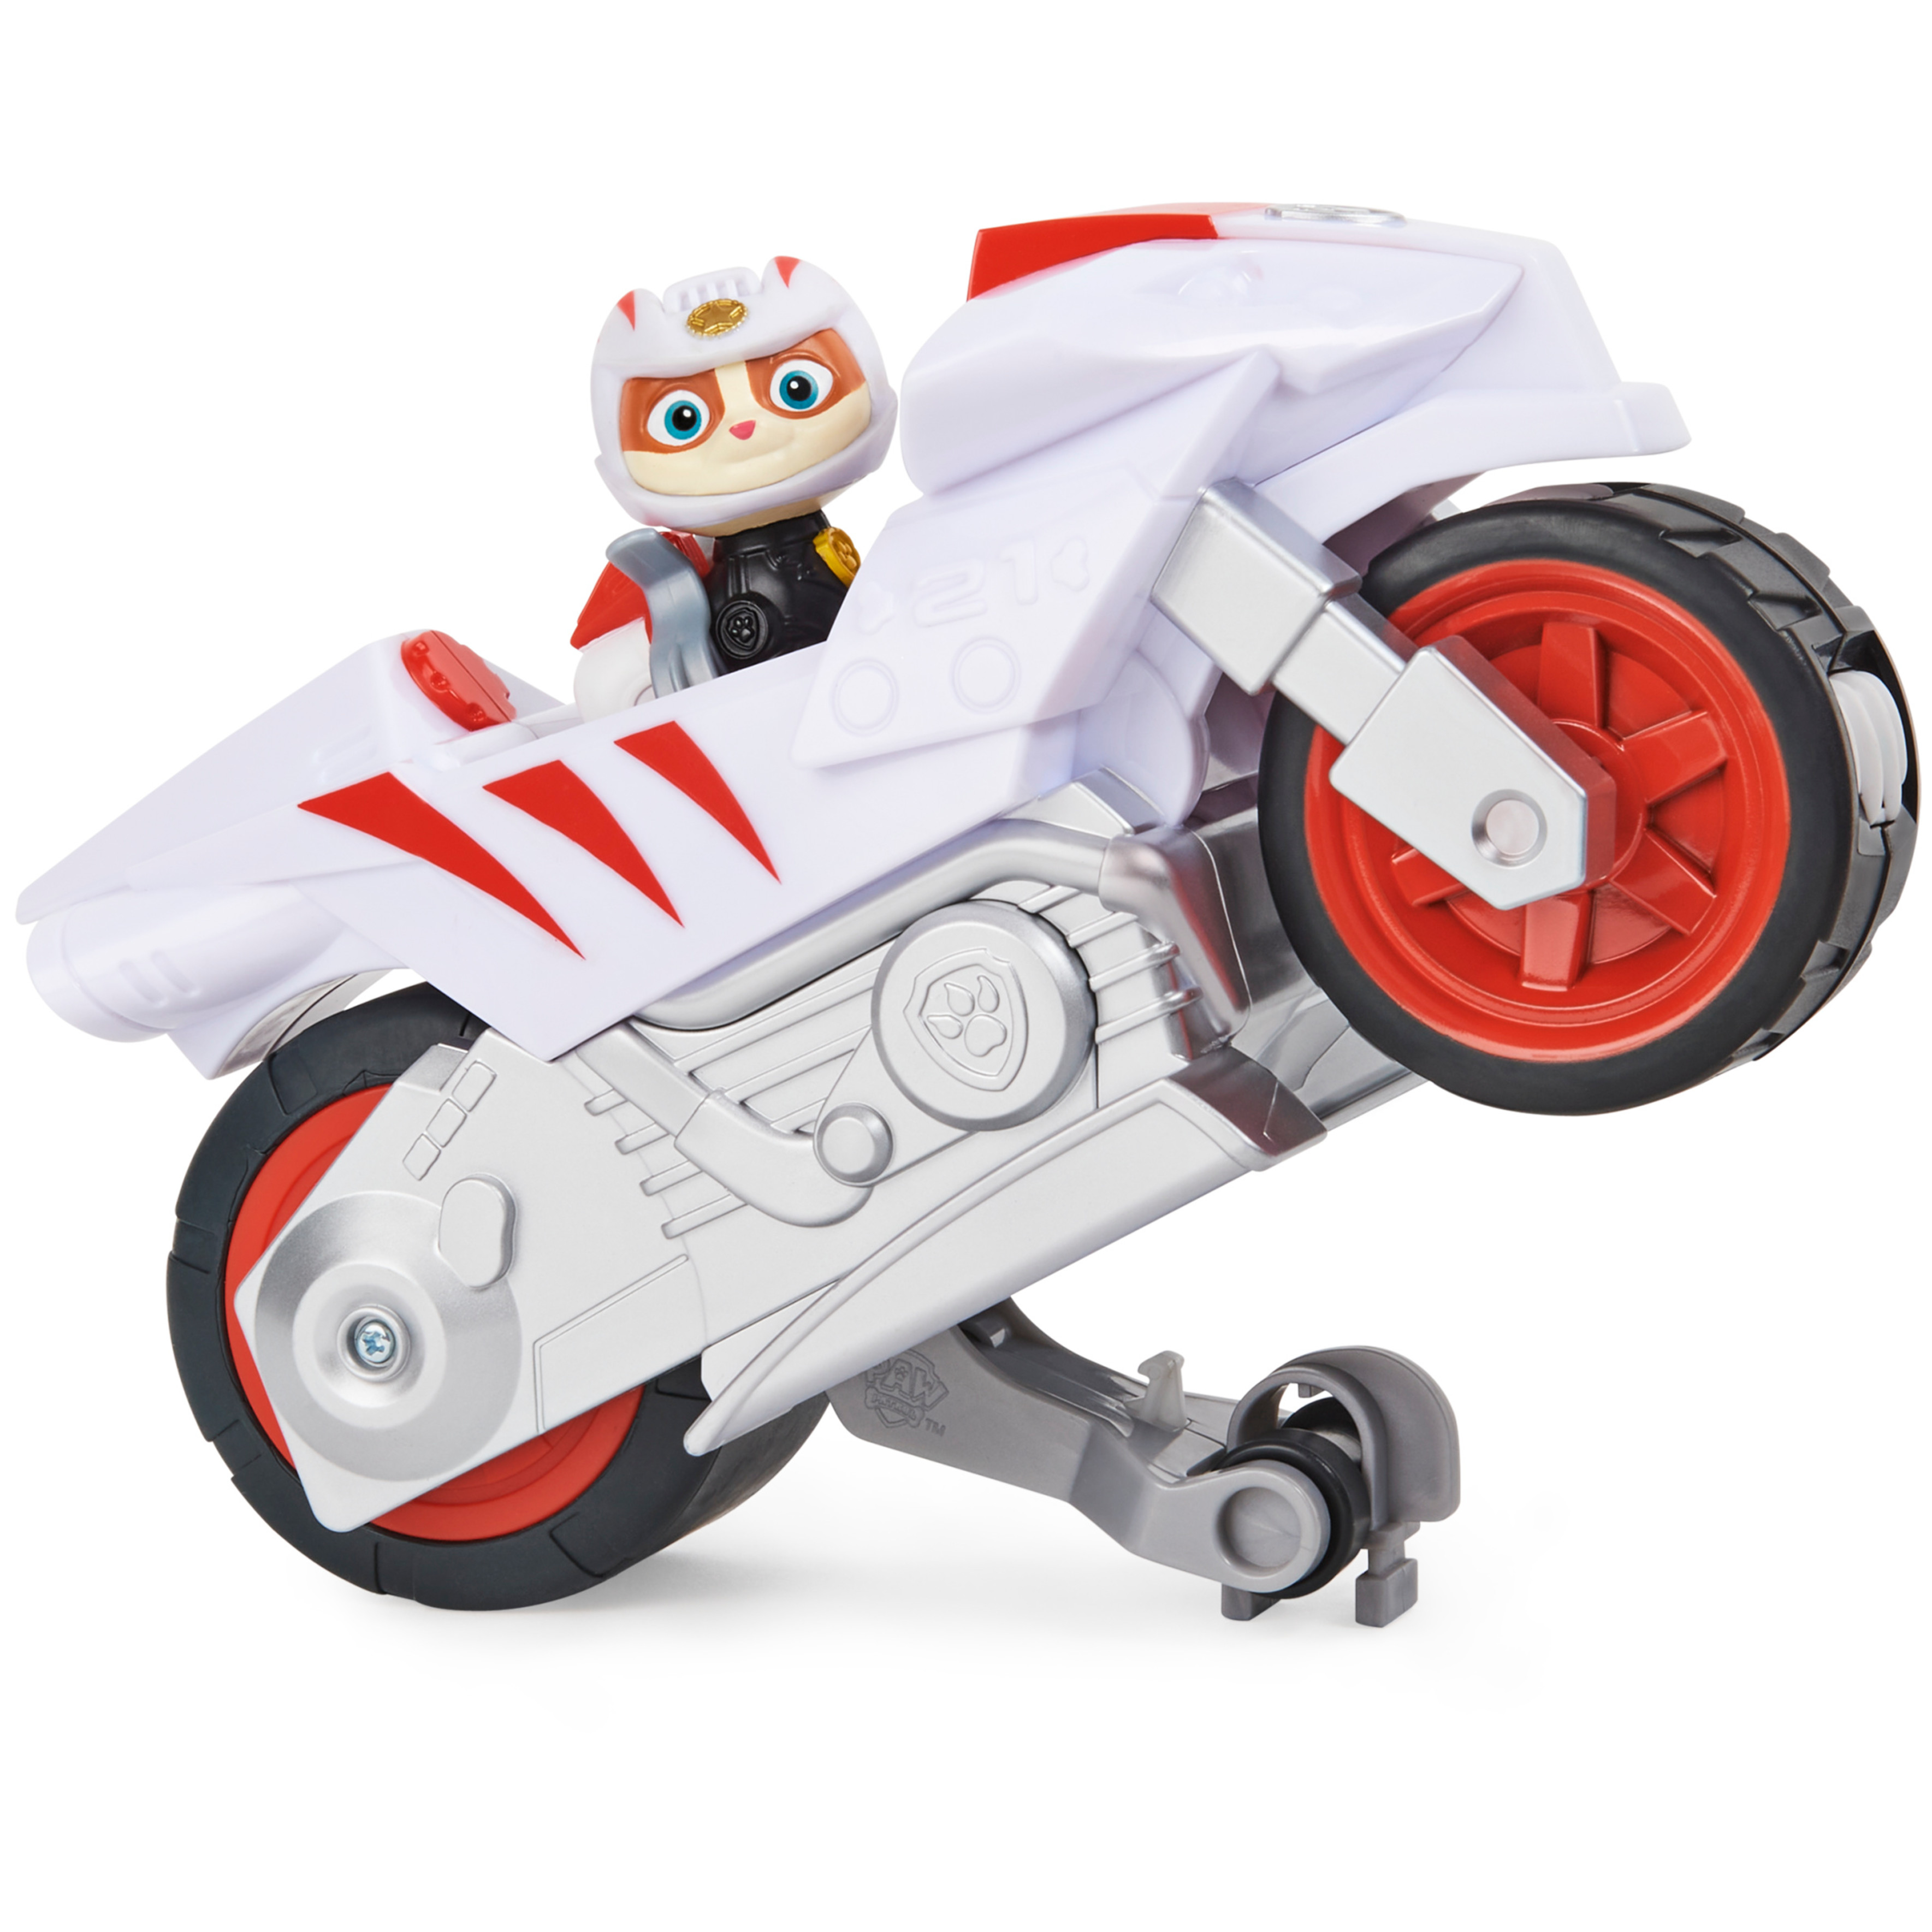 PAW Patrol, Moto Pups Wildcat’s Deluxe Pull Back Motorcycle Vehicle with Wheelie Feature and Toy Figure - image 5 of 8